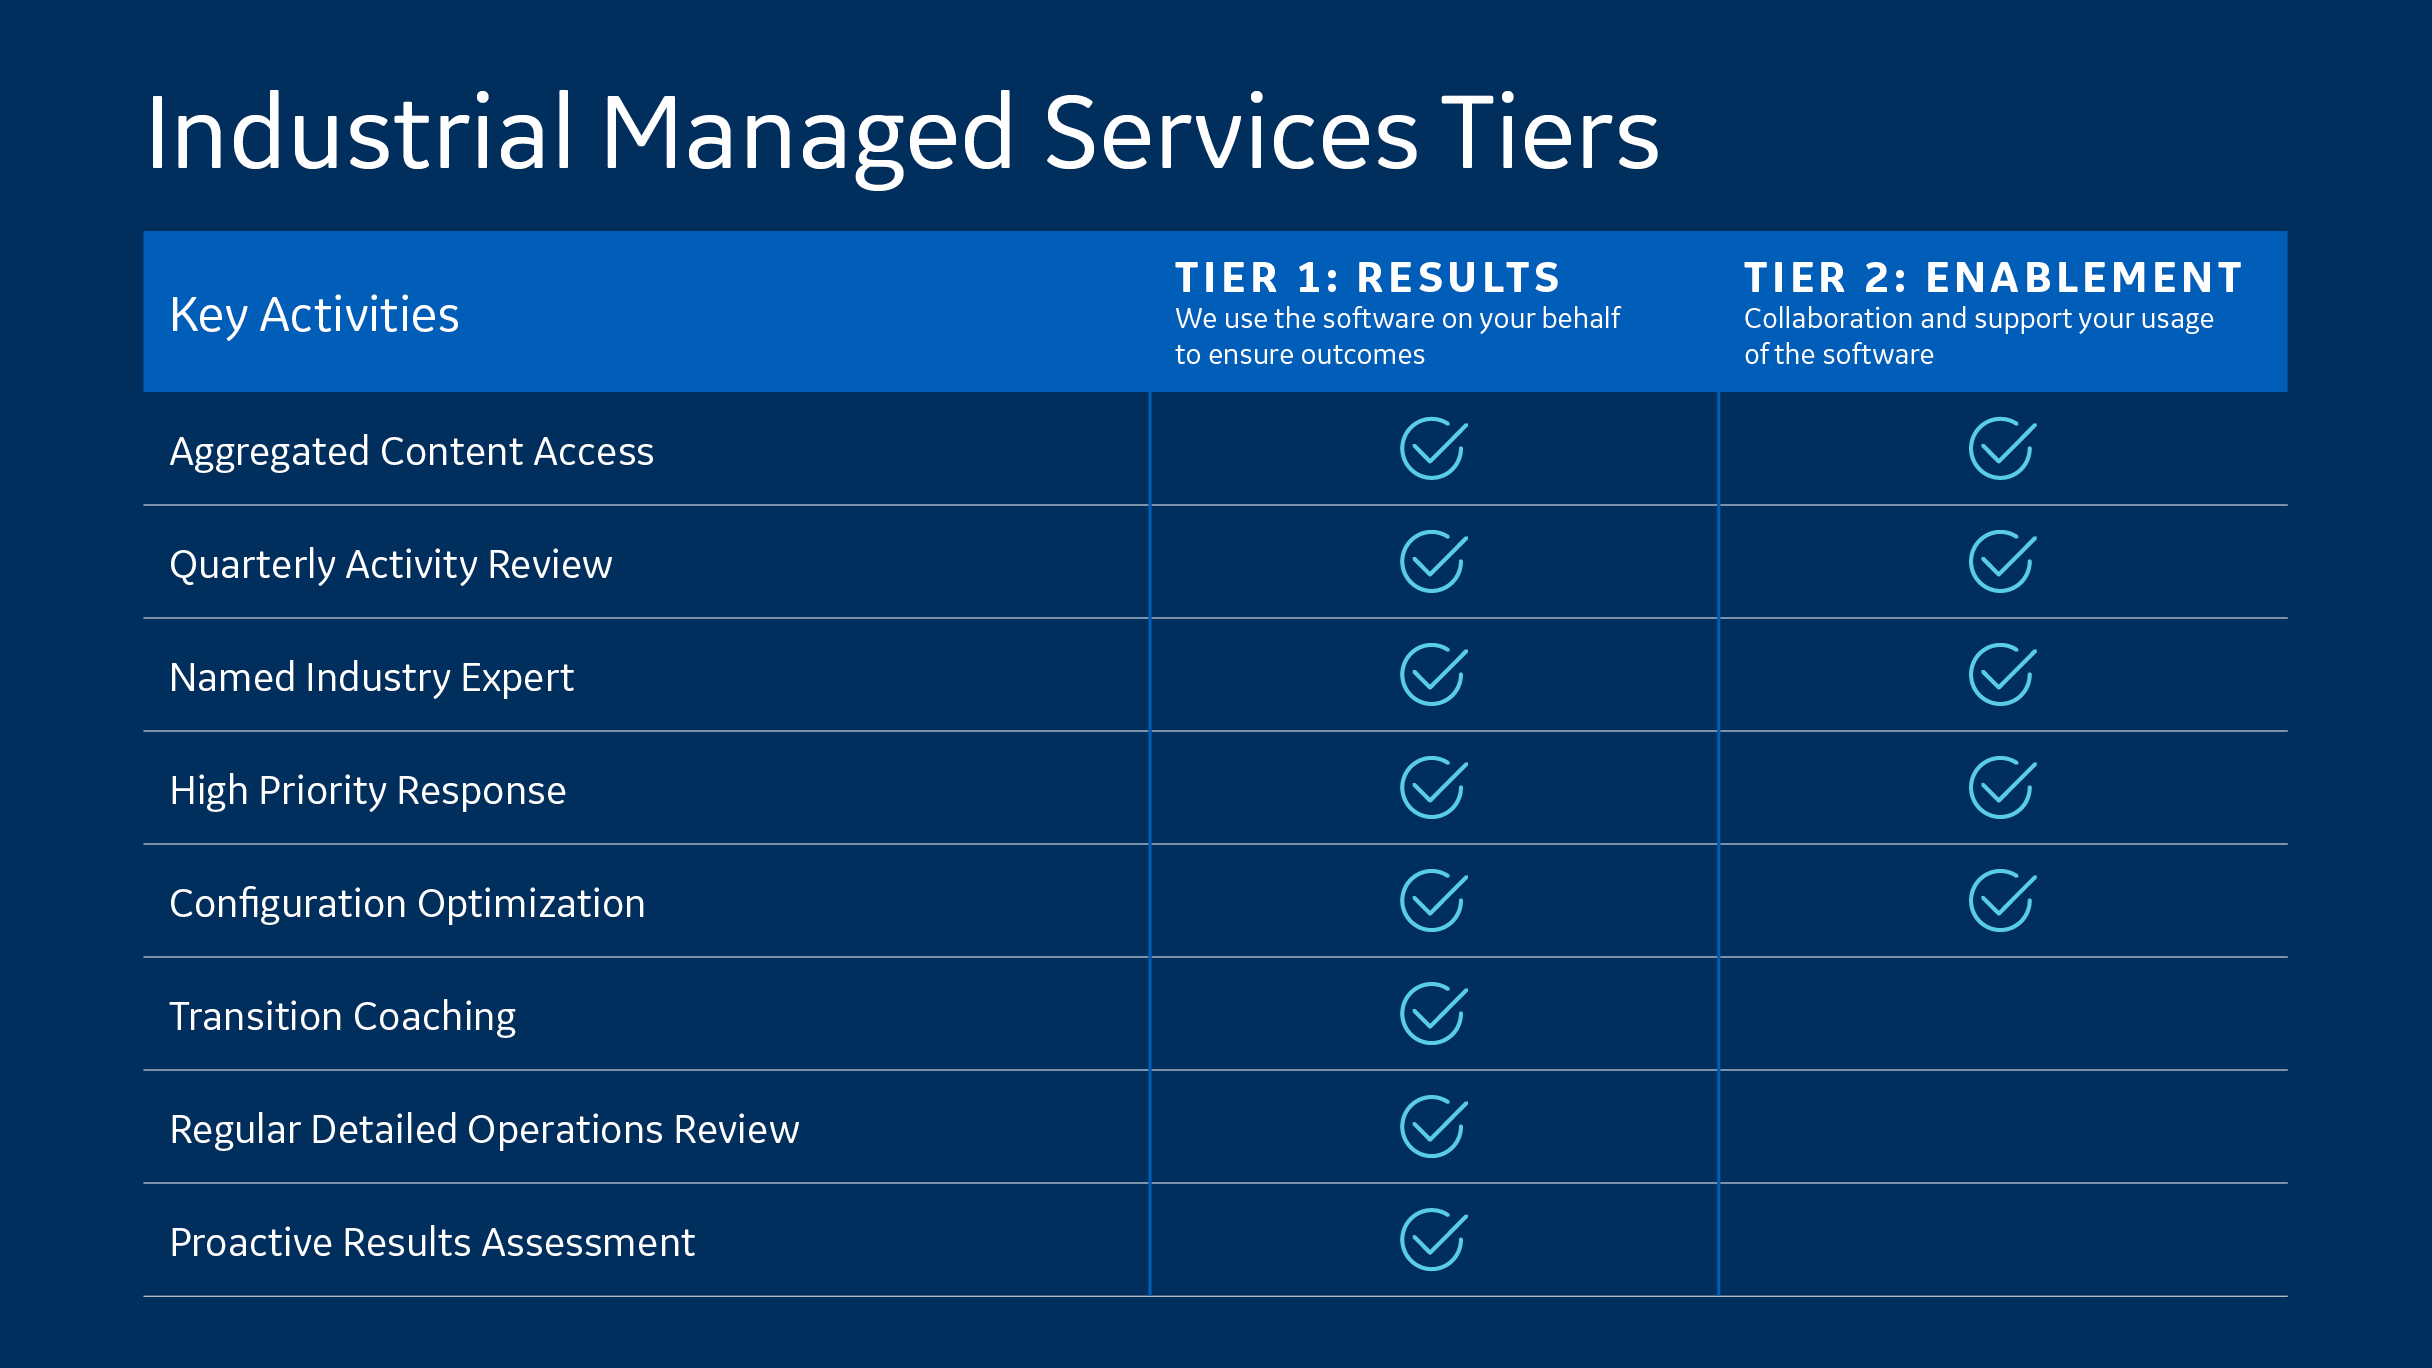 GE Digital's Managed Services Offerings